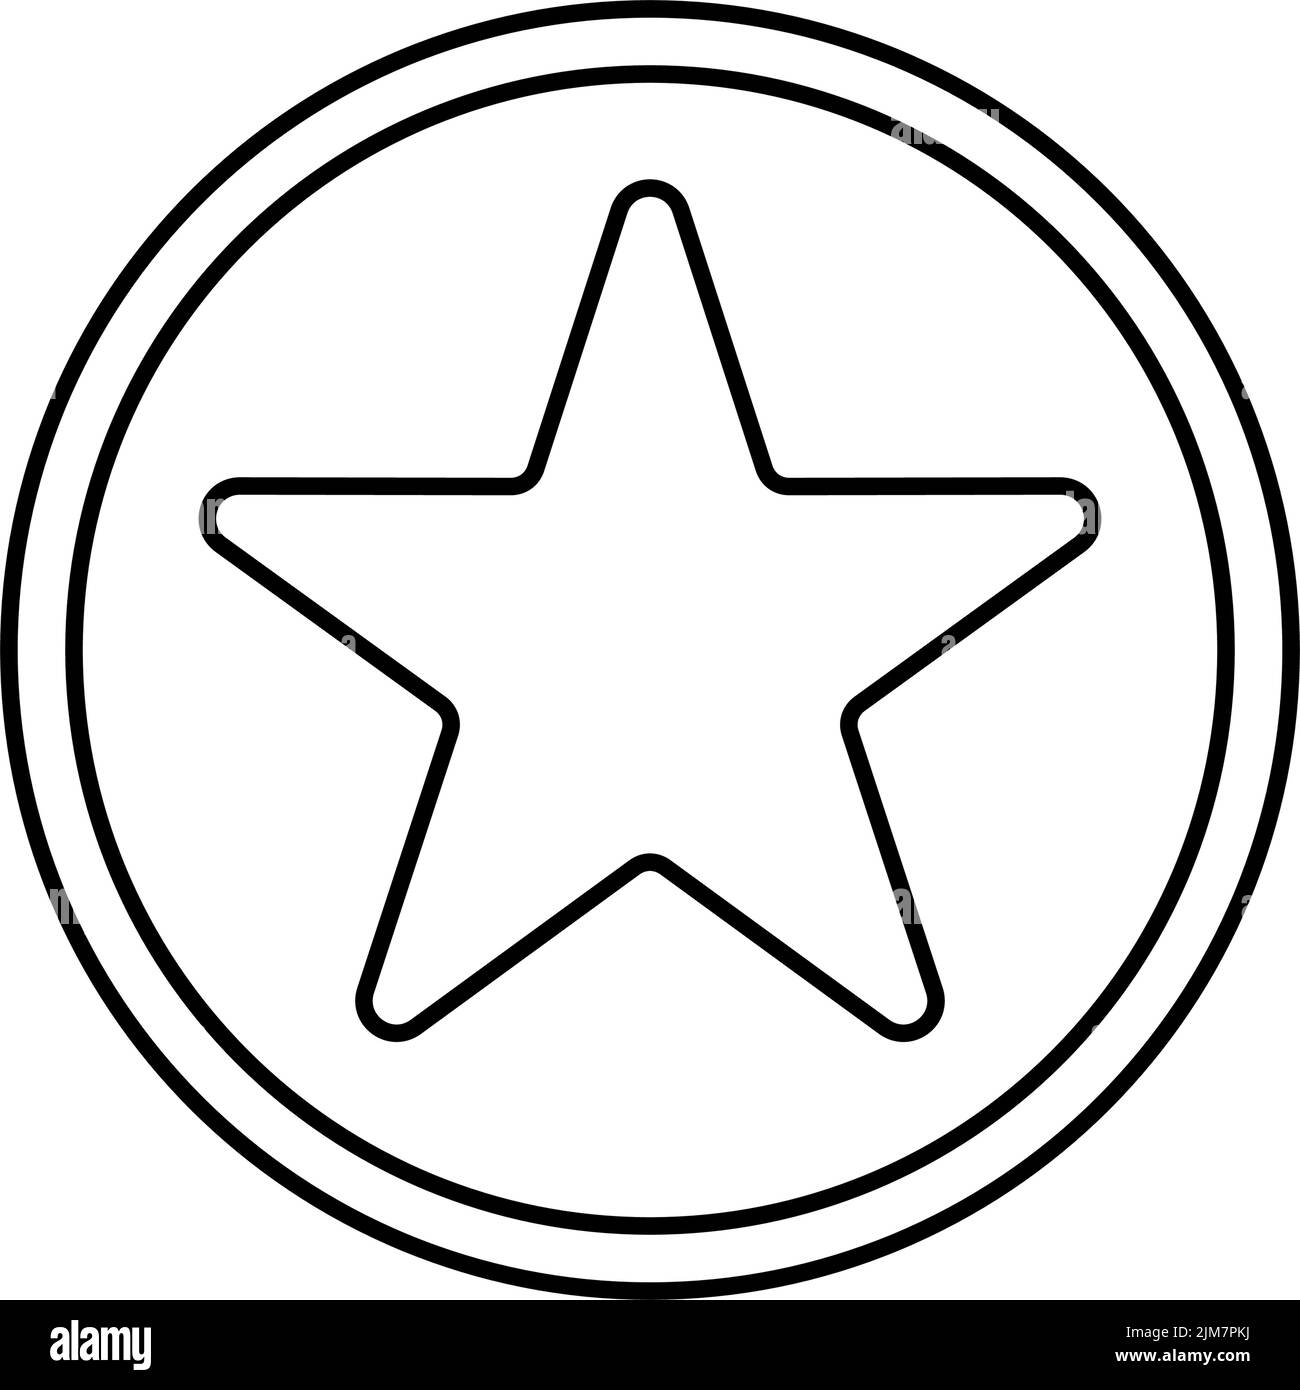 The monochrome star sign in the circle with white background Stock Vector